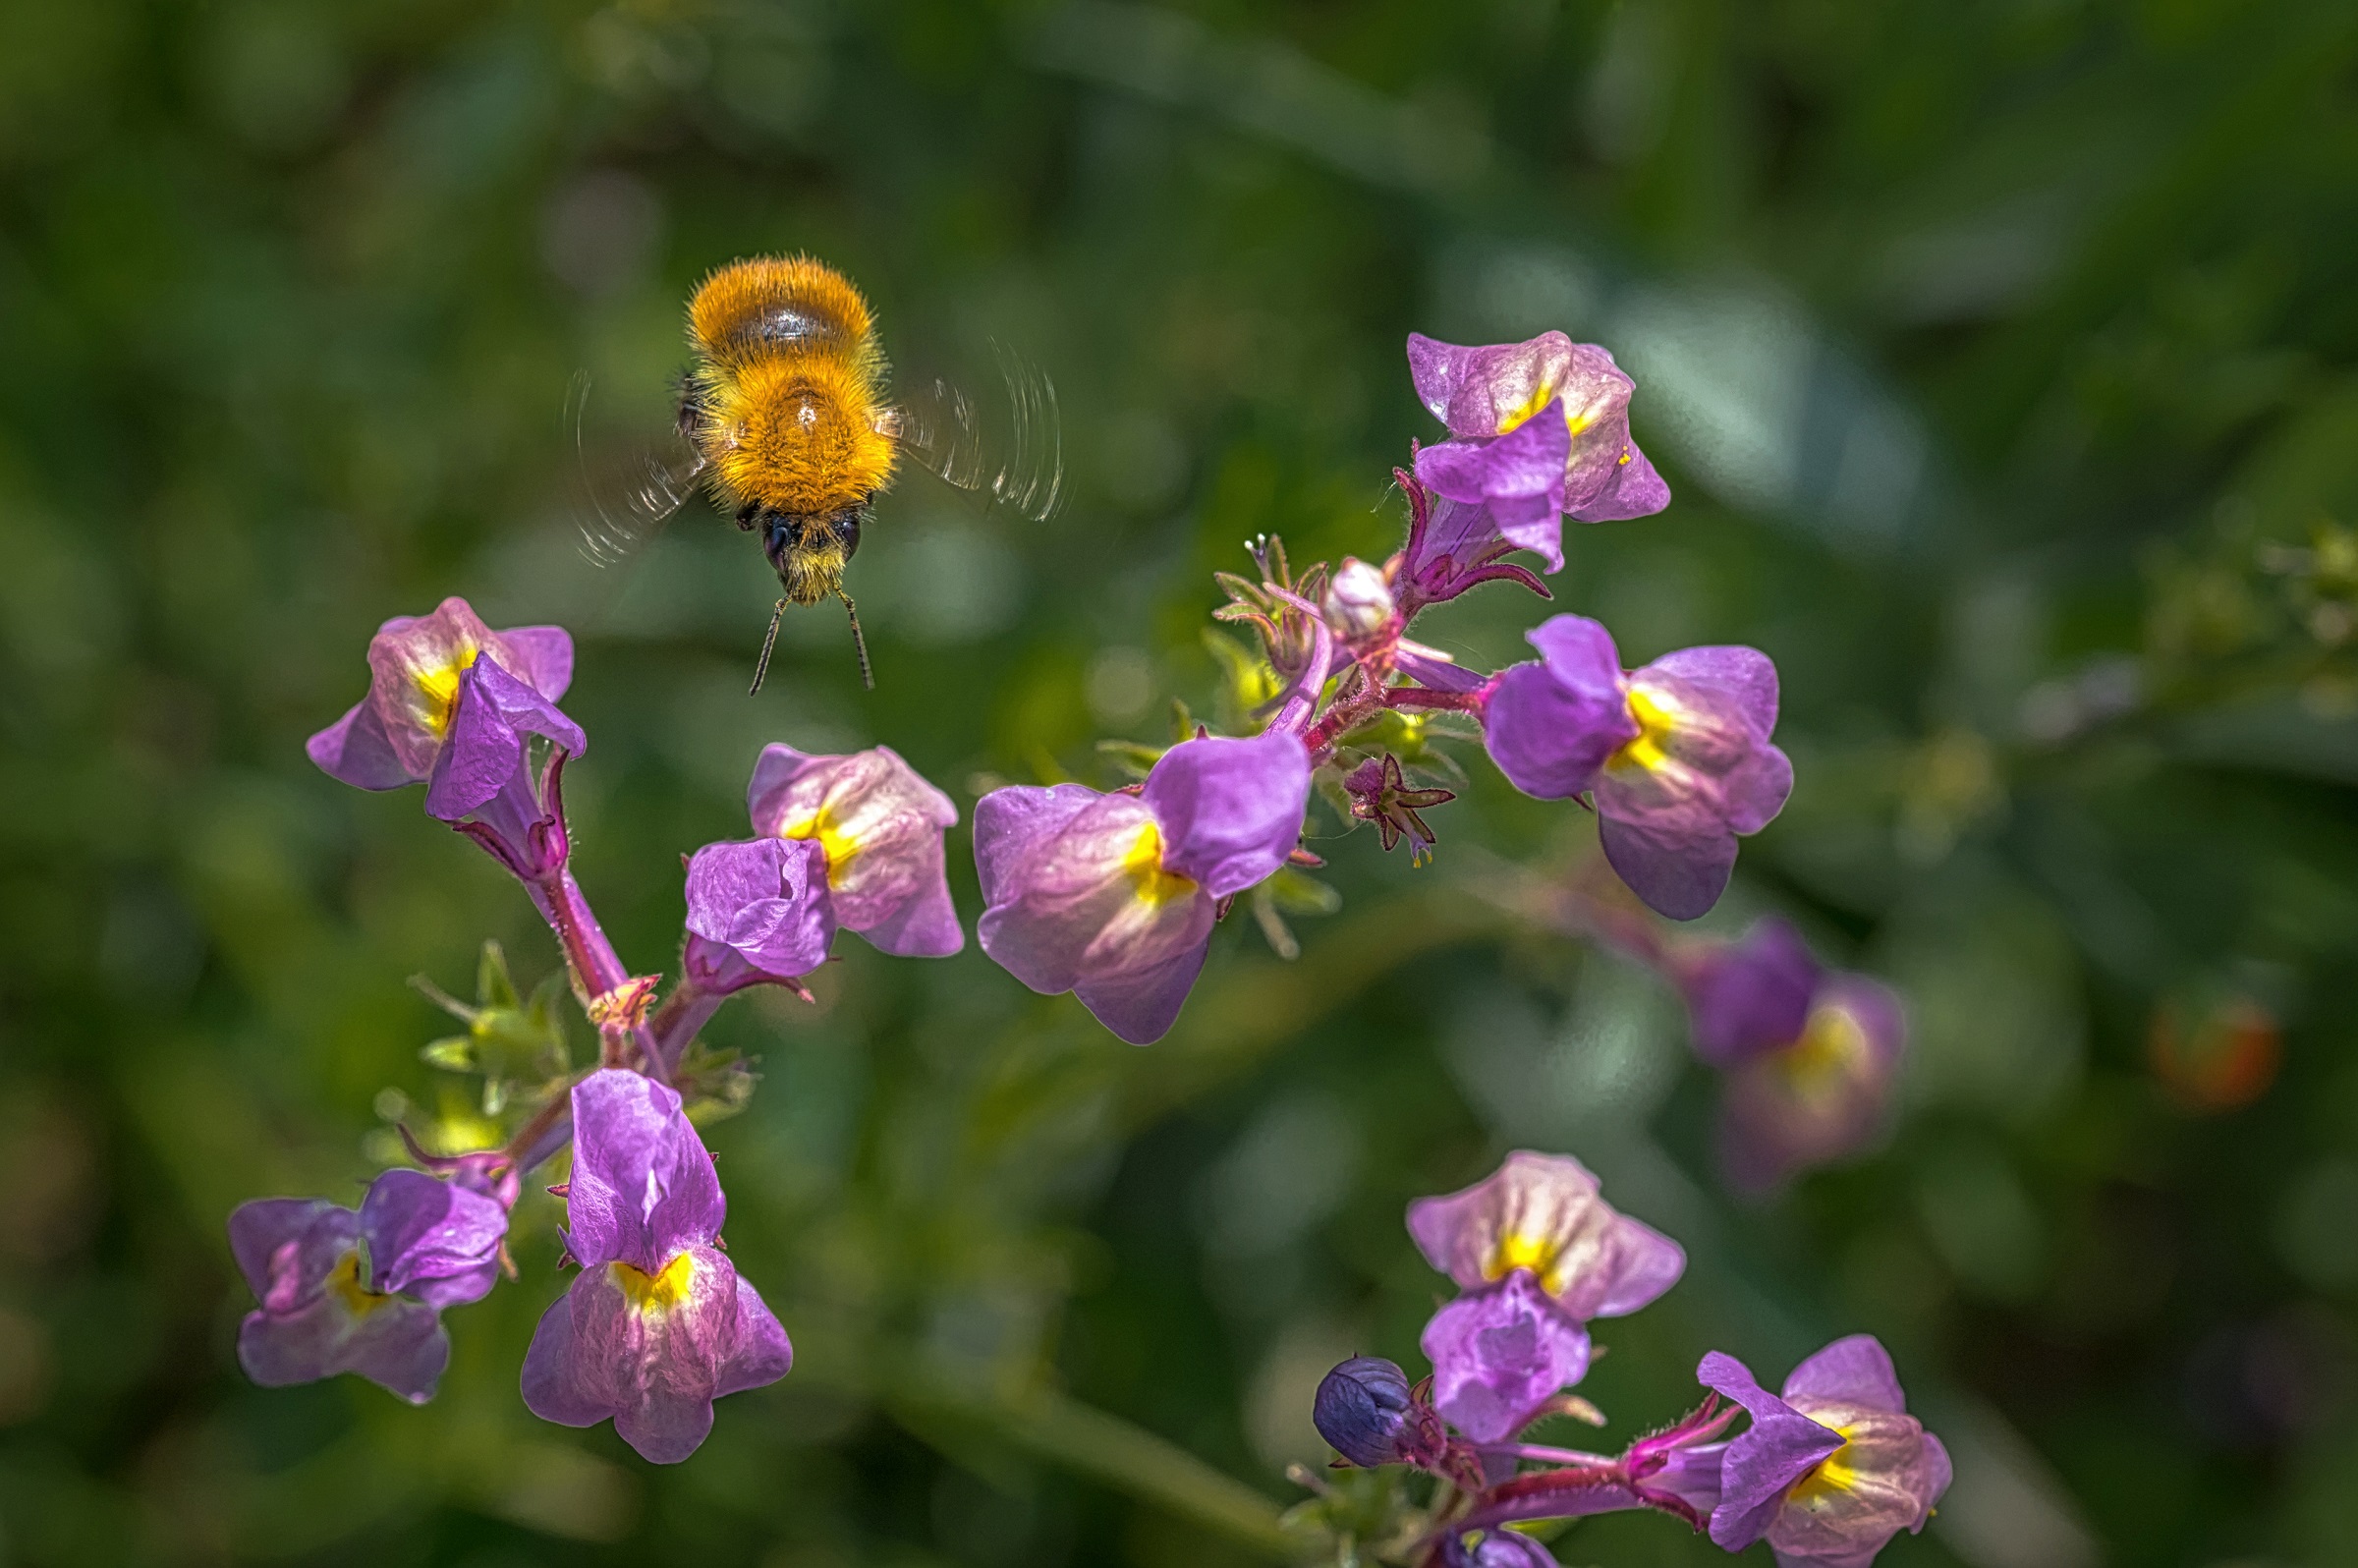 The flight of the Bumblebee...